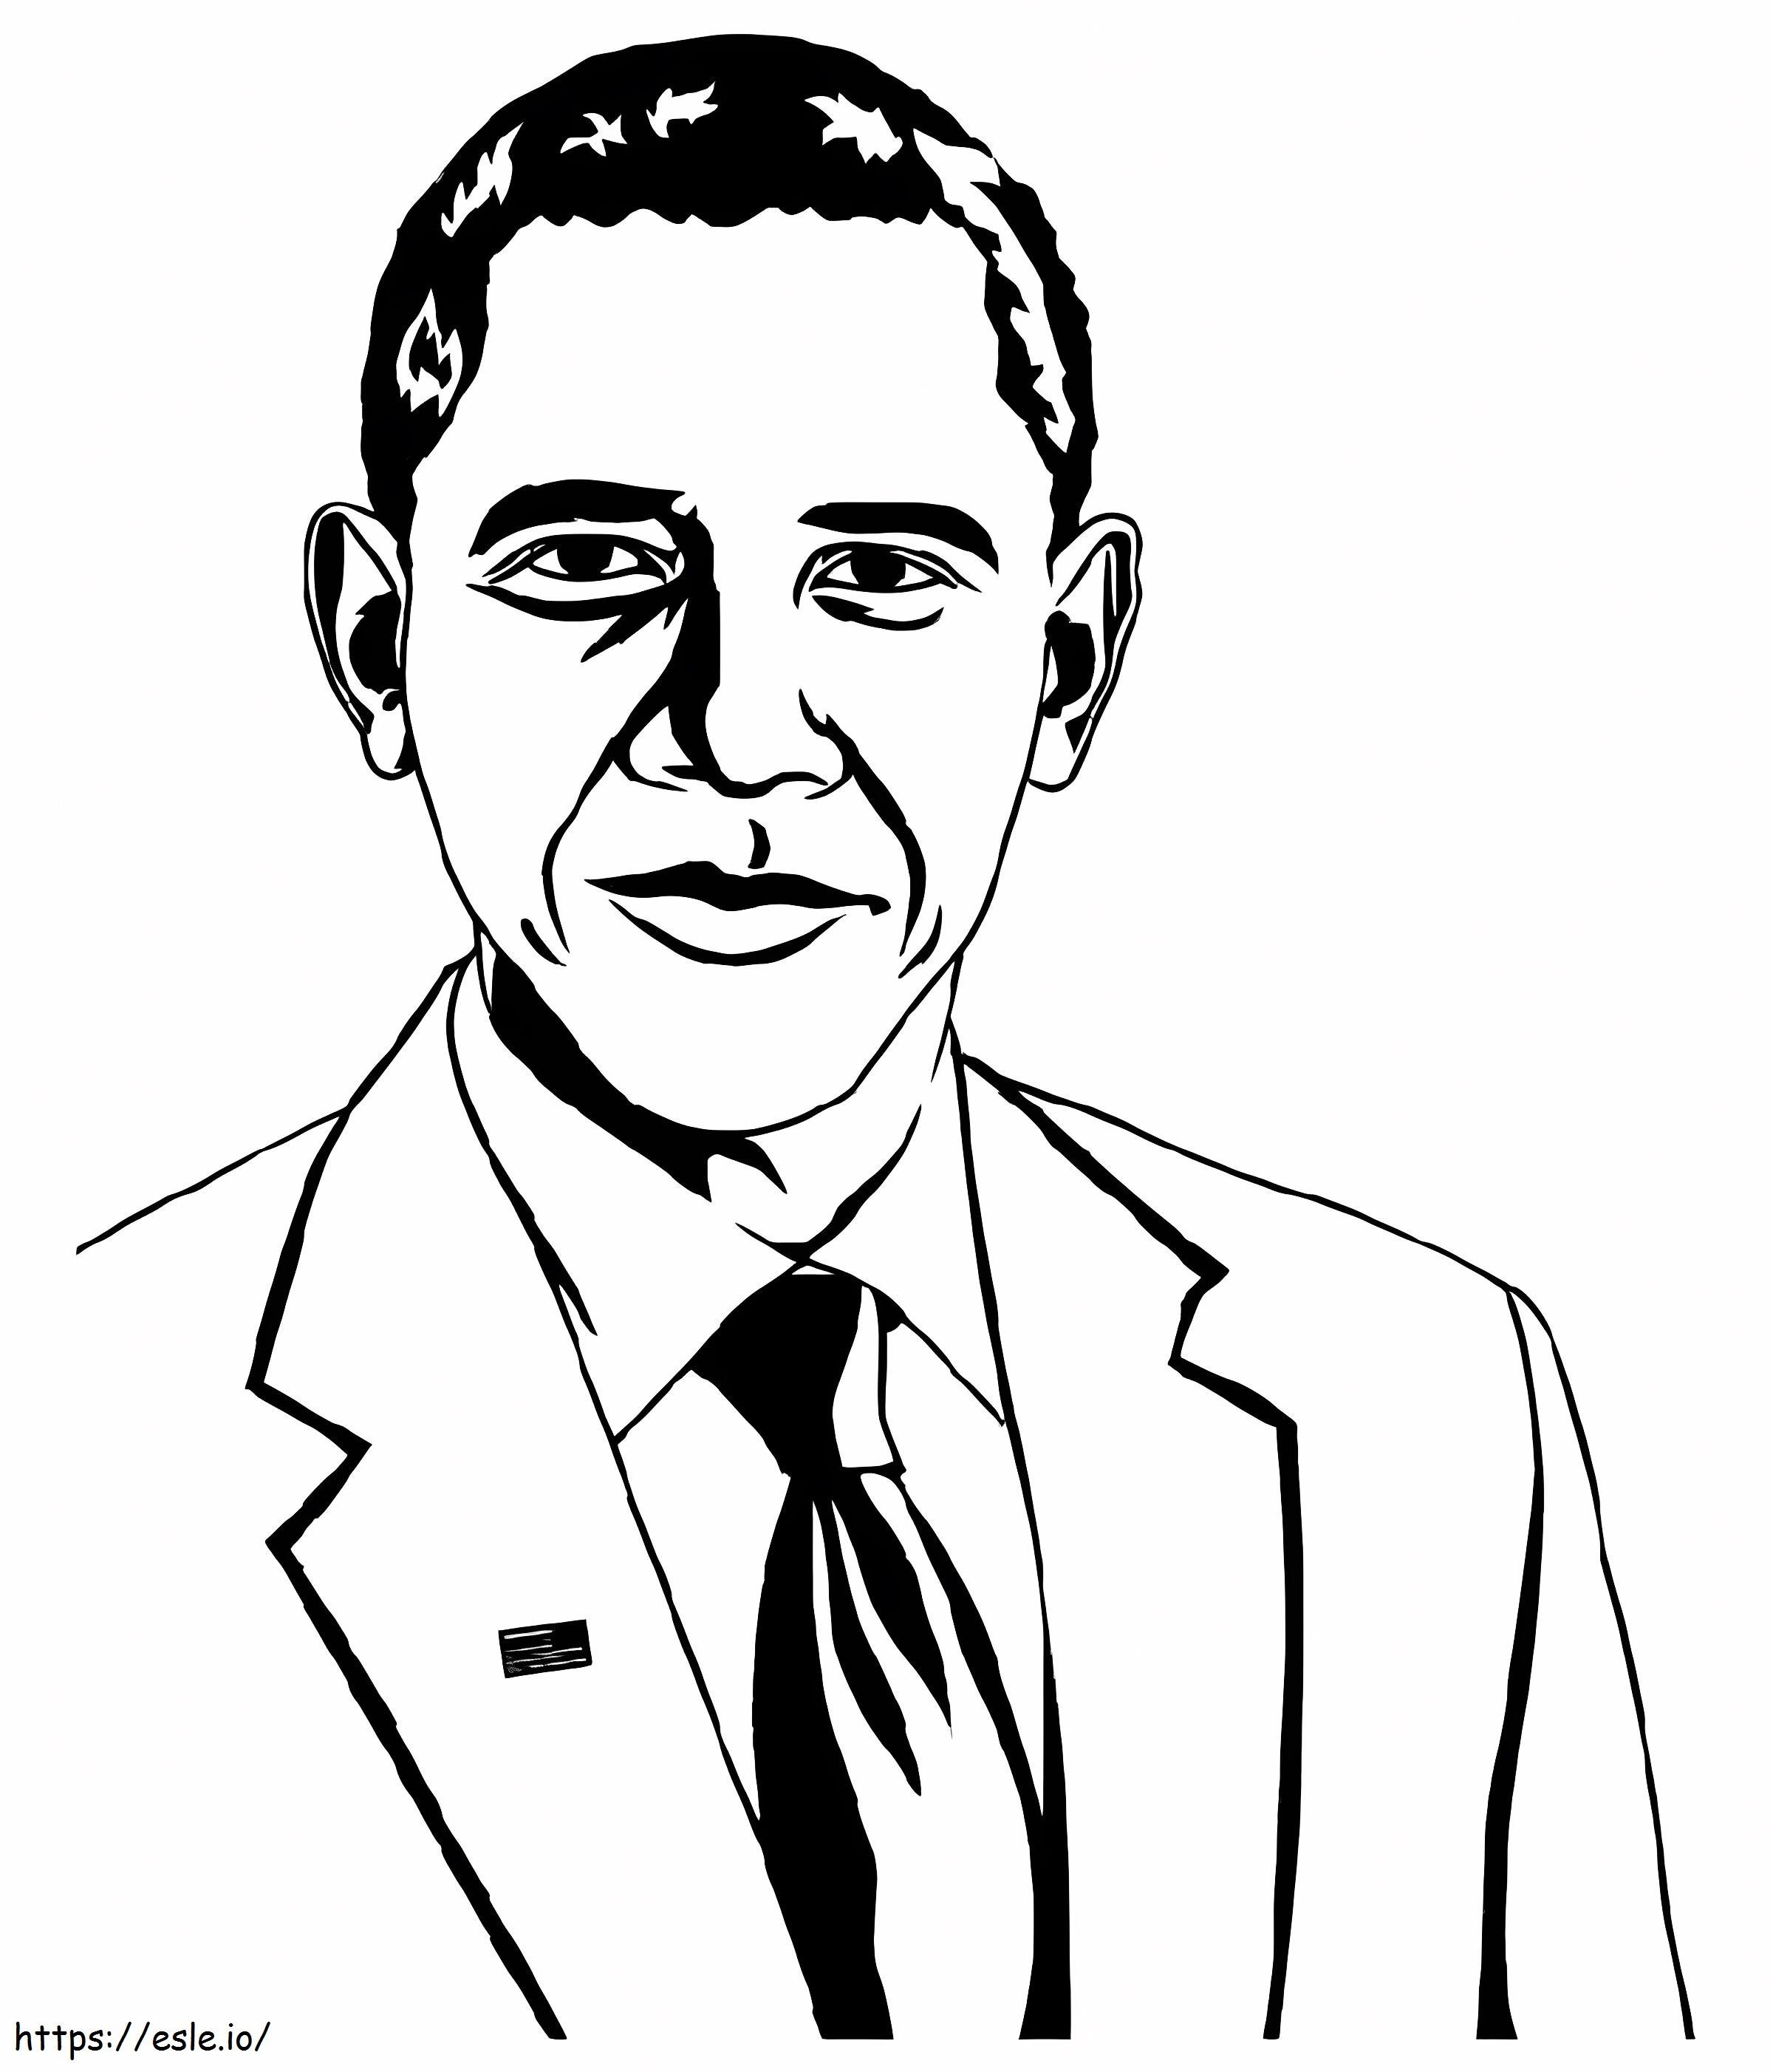 Great Obama coloring page